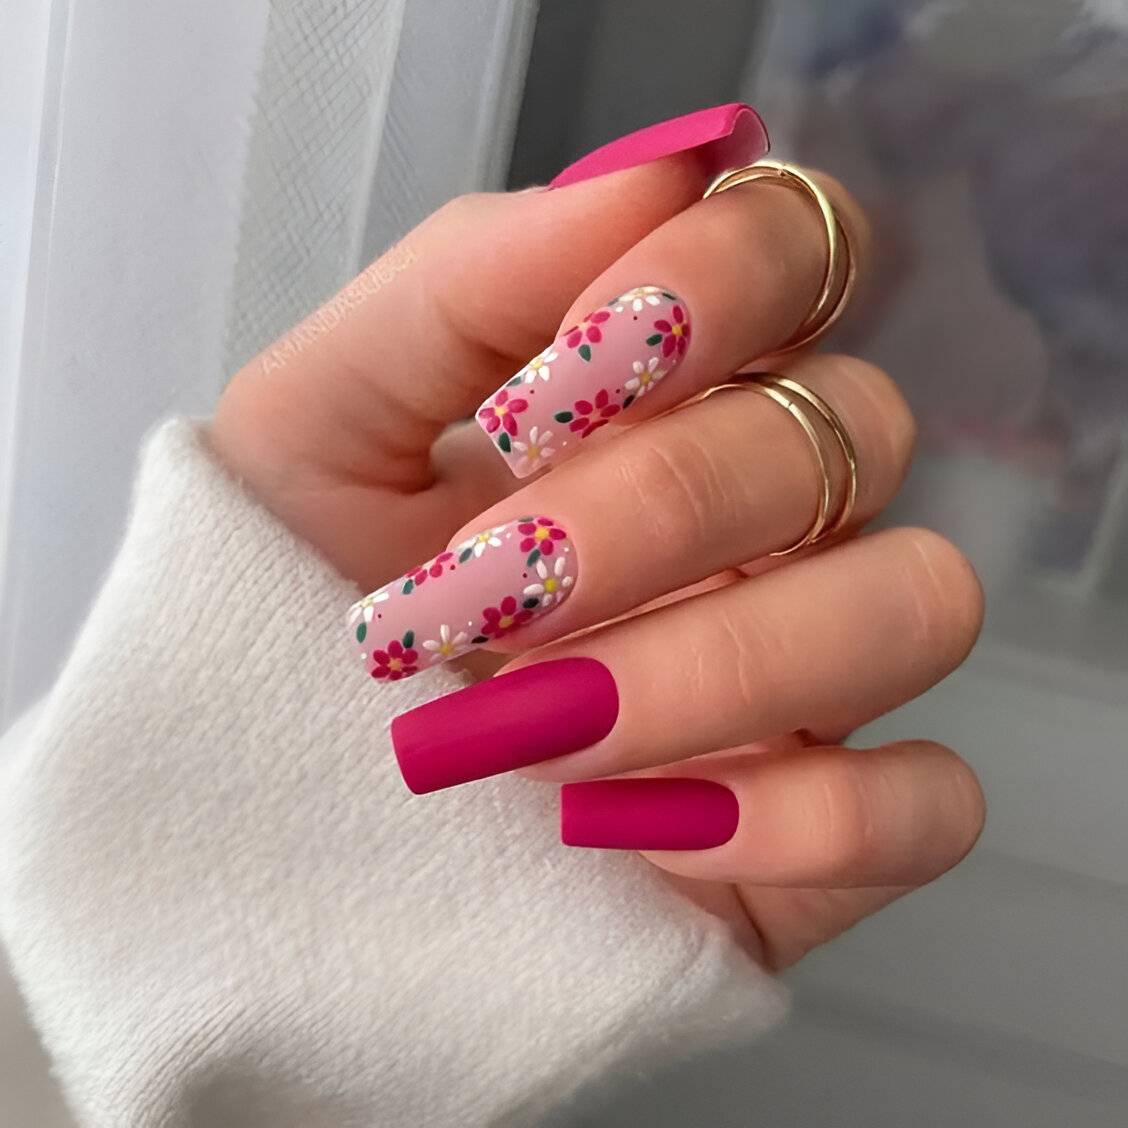 30 Gorgeous Flower Nail Designs No Pretty Girl Should Miss - 229